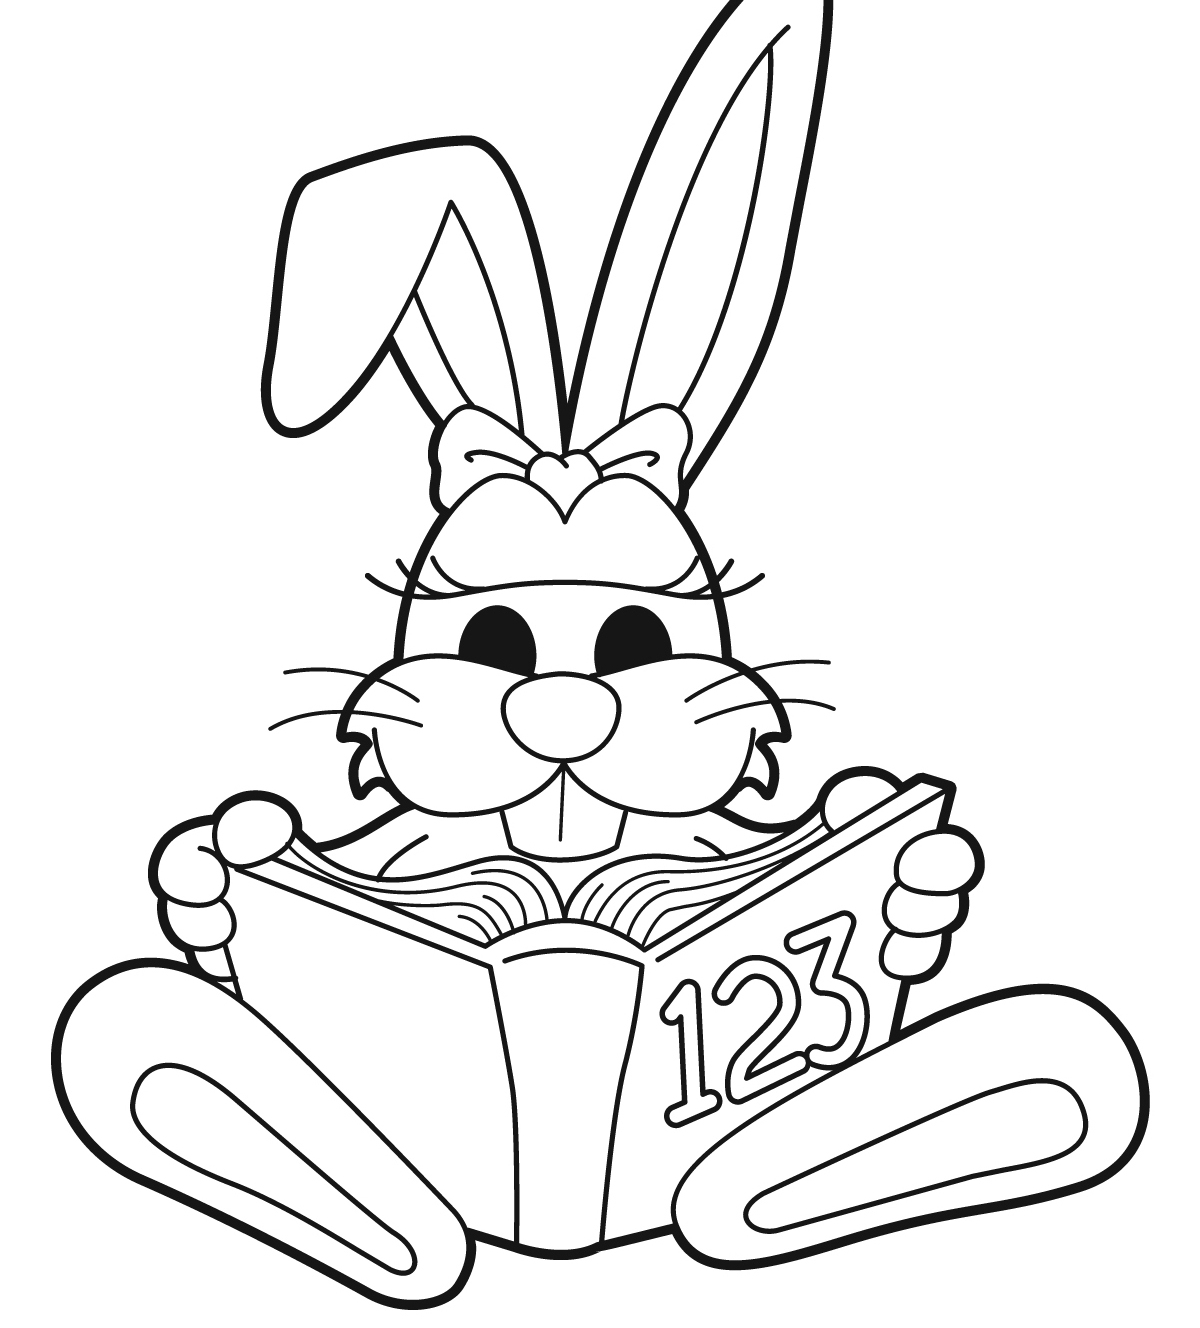 Rabbit Learn Math - Math Coloring Pages : Coloring Pages for Kids ...